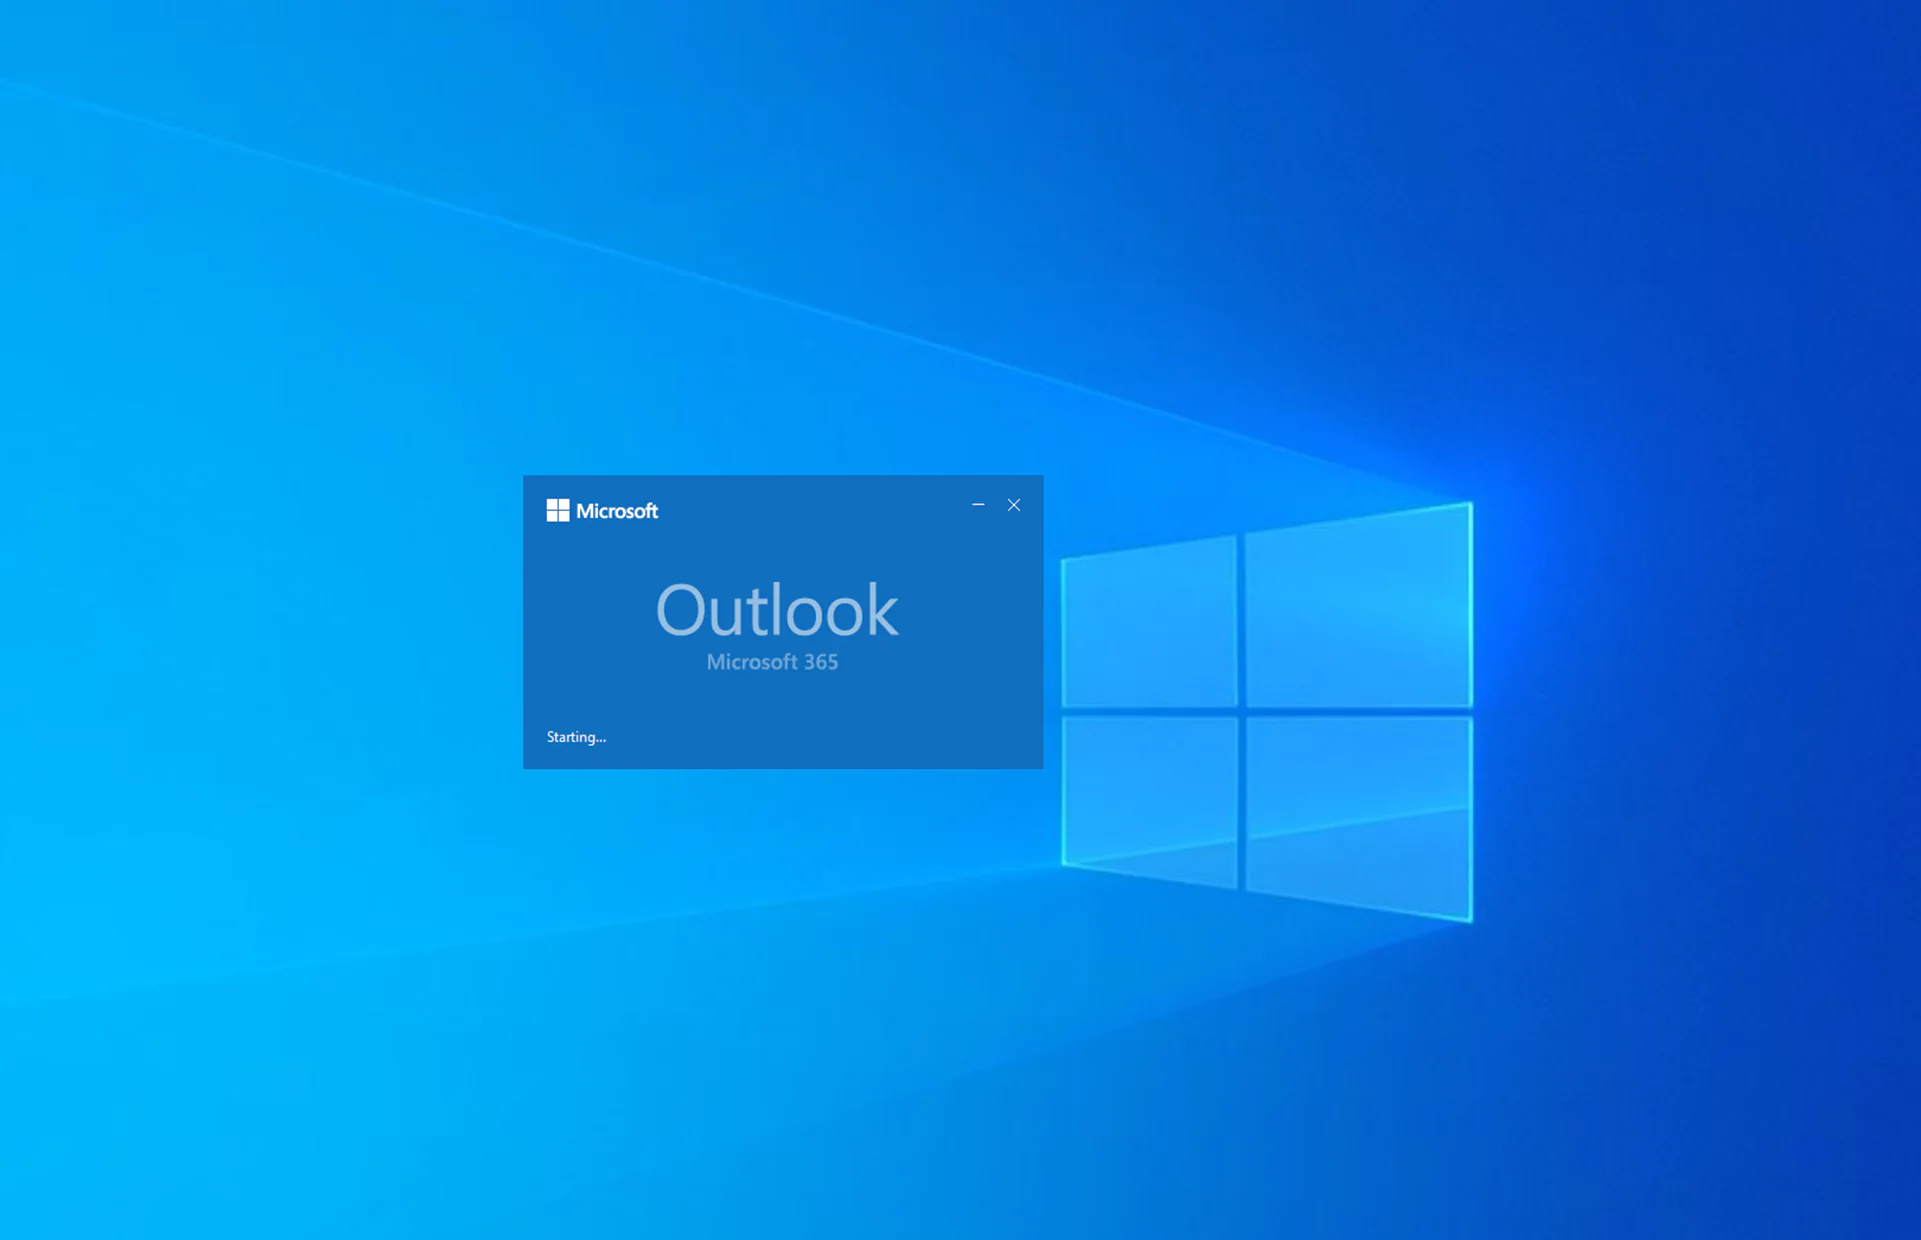 Teams Meeting Not Showing in Outlook: How to Fix